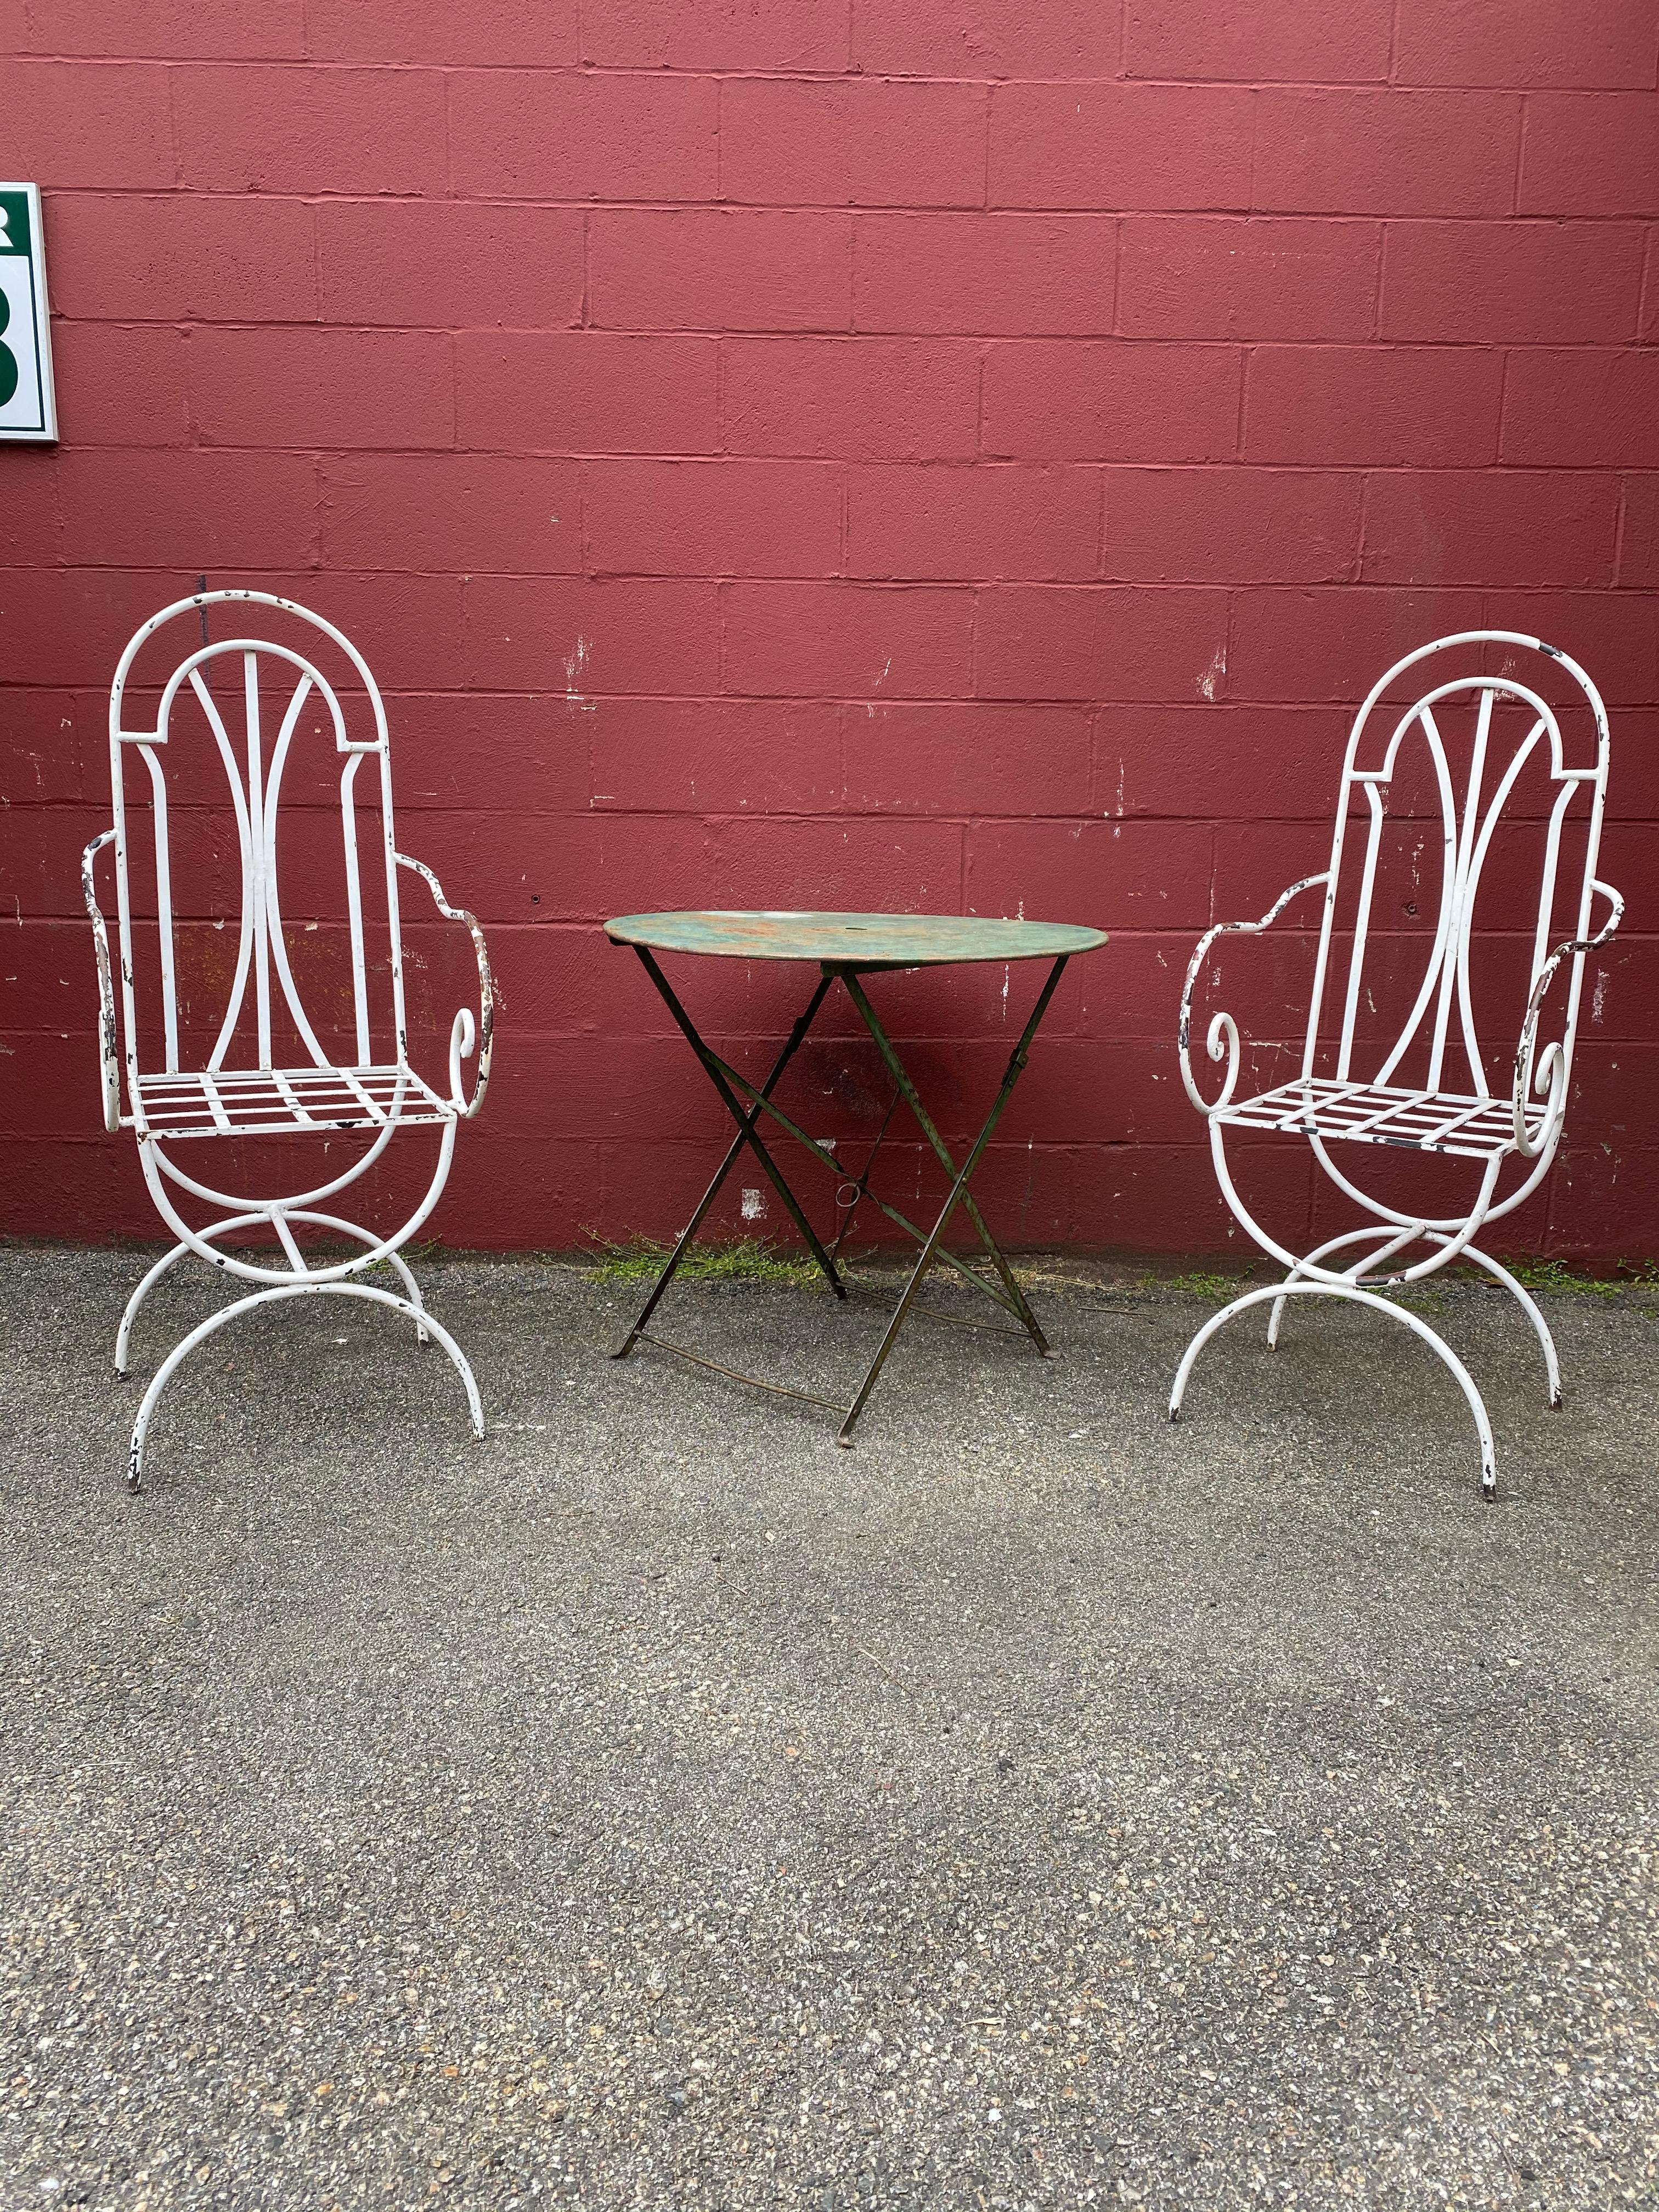 This pair of vintage French garden chairs is a timeless and elegant addition to any outdoor space. The tall back design offers ample support for comfortable seating, while the white painted iron construction is both durable and sturdy. The paint is